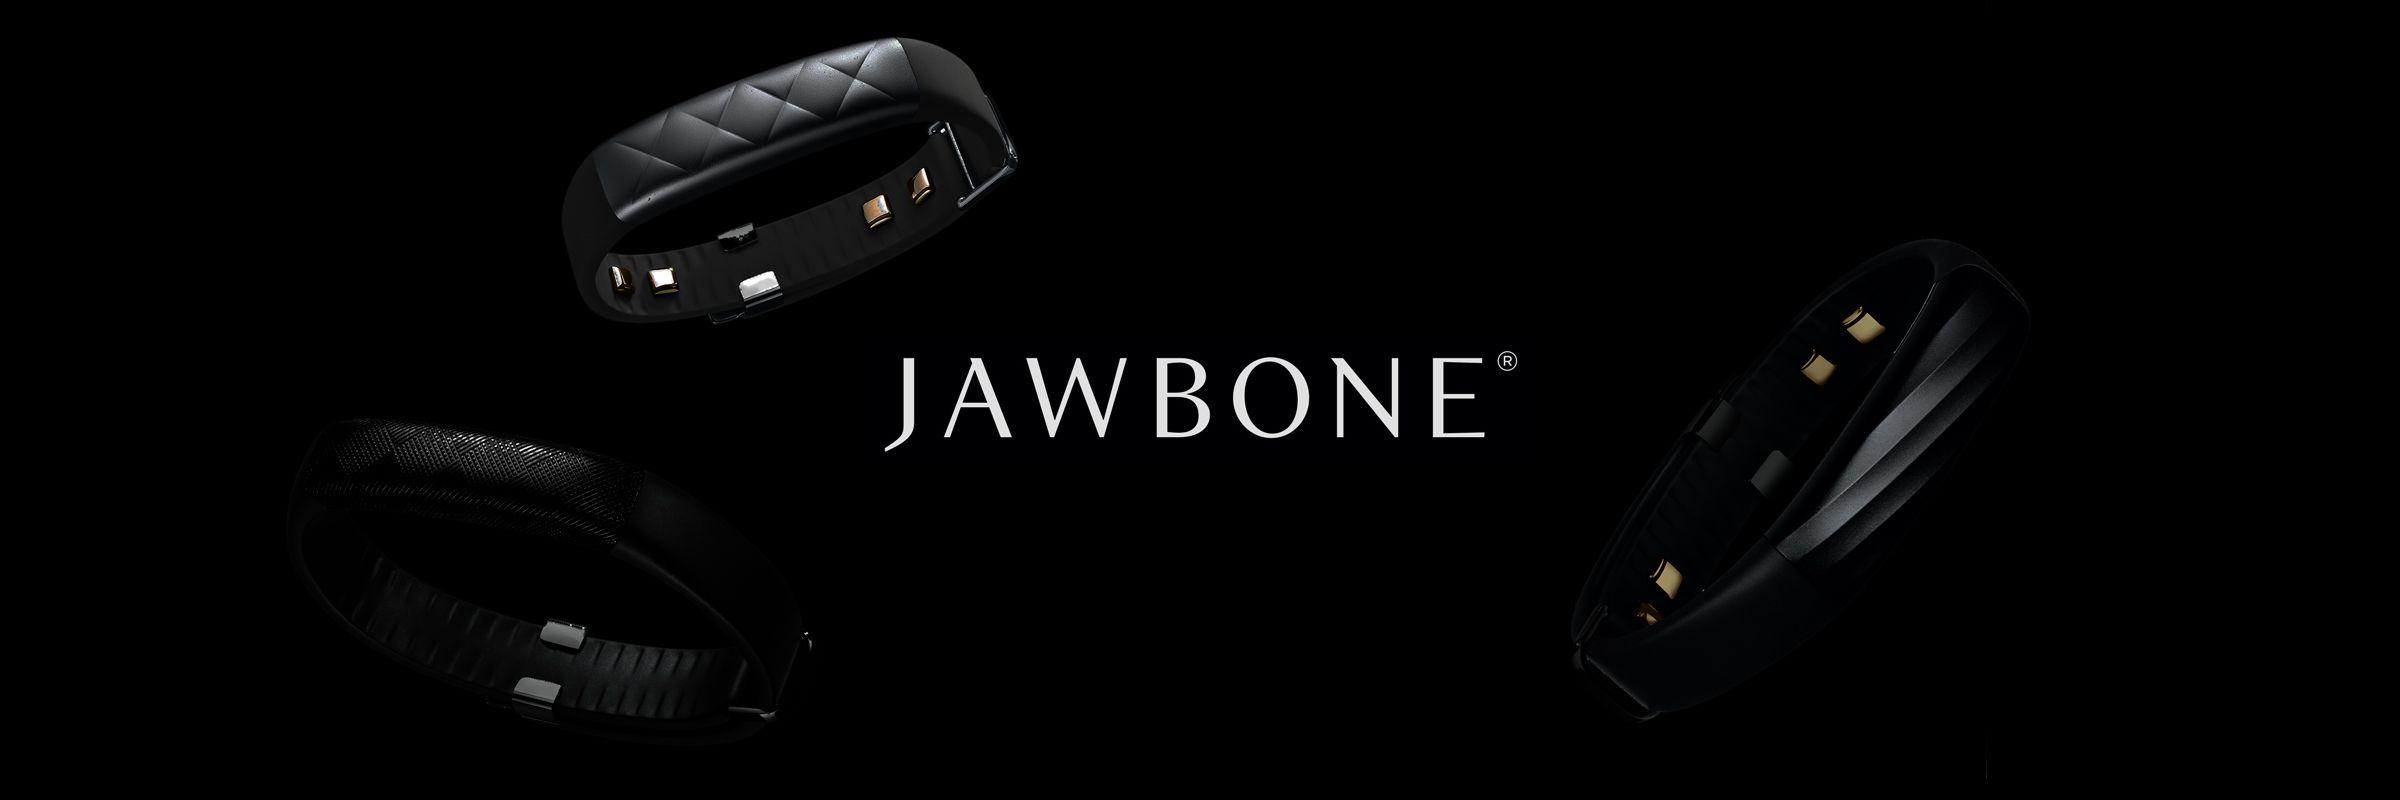 Jawbone Logo - An Update on Jawbone's Recent Pivot, Clinical Health, and the Future